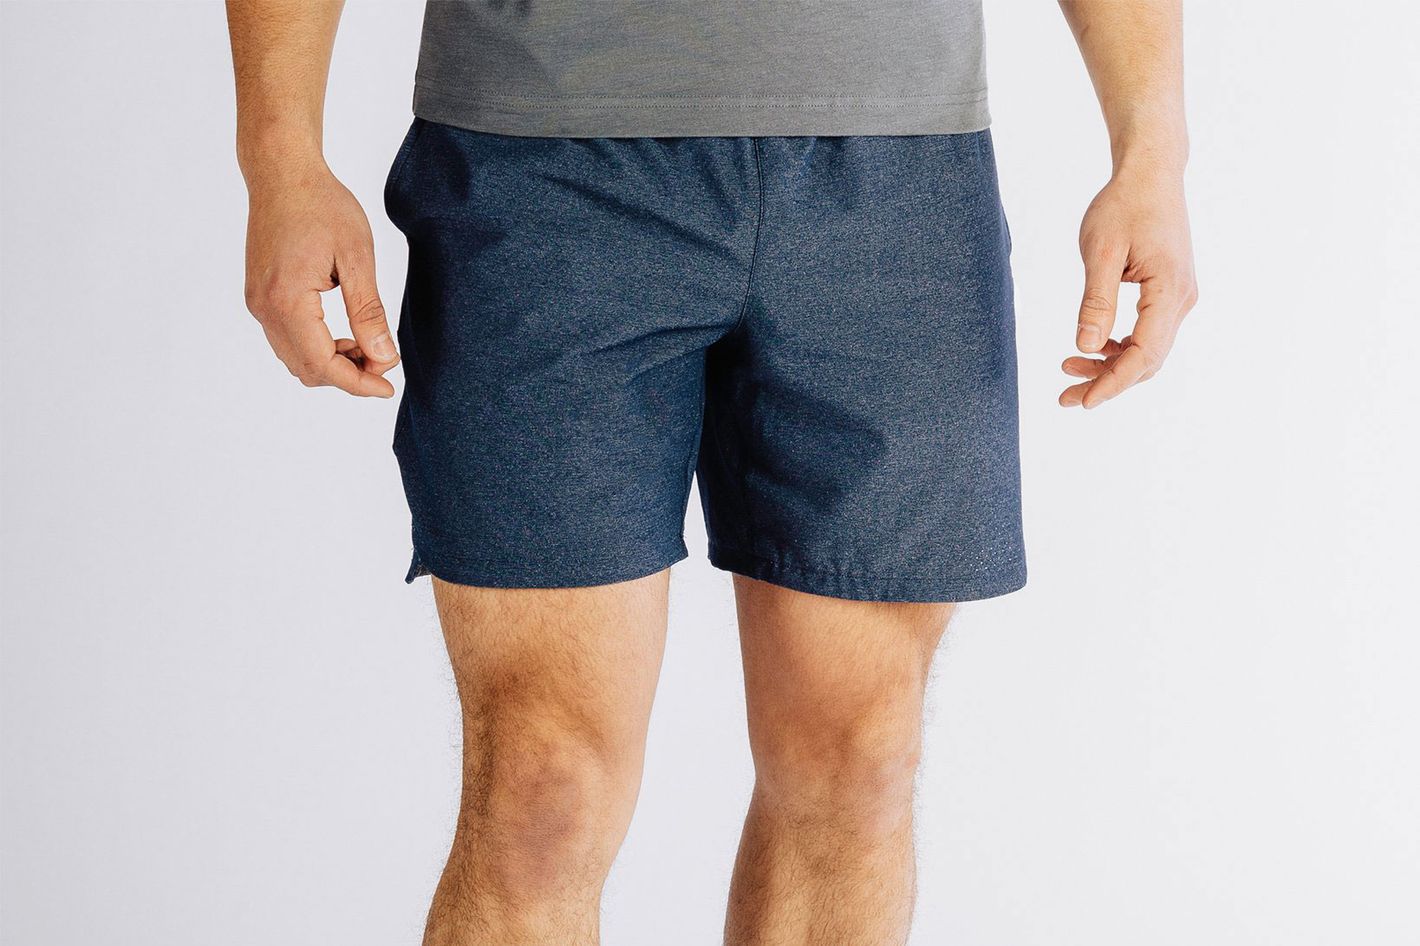 20 Best Men's Gym Shorts For Every Workout